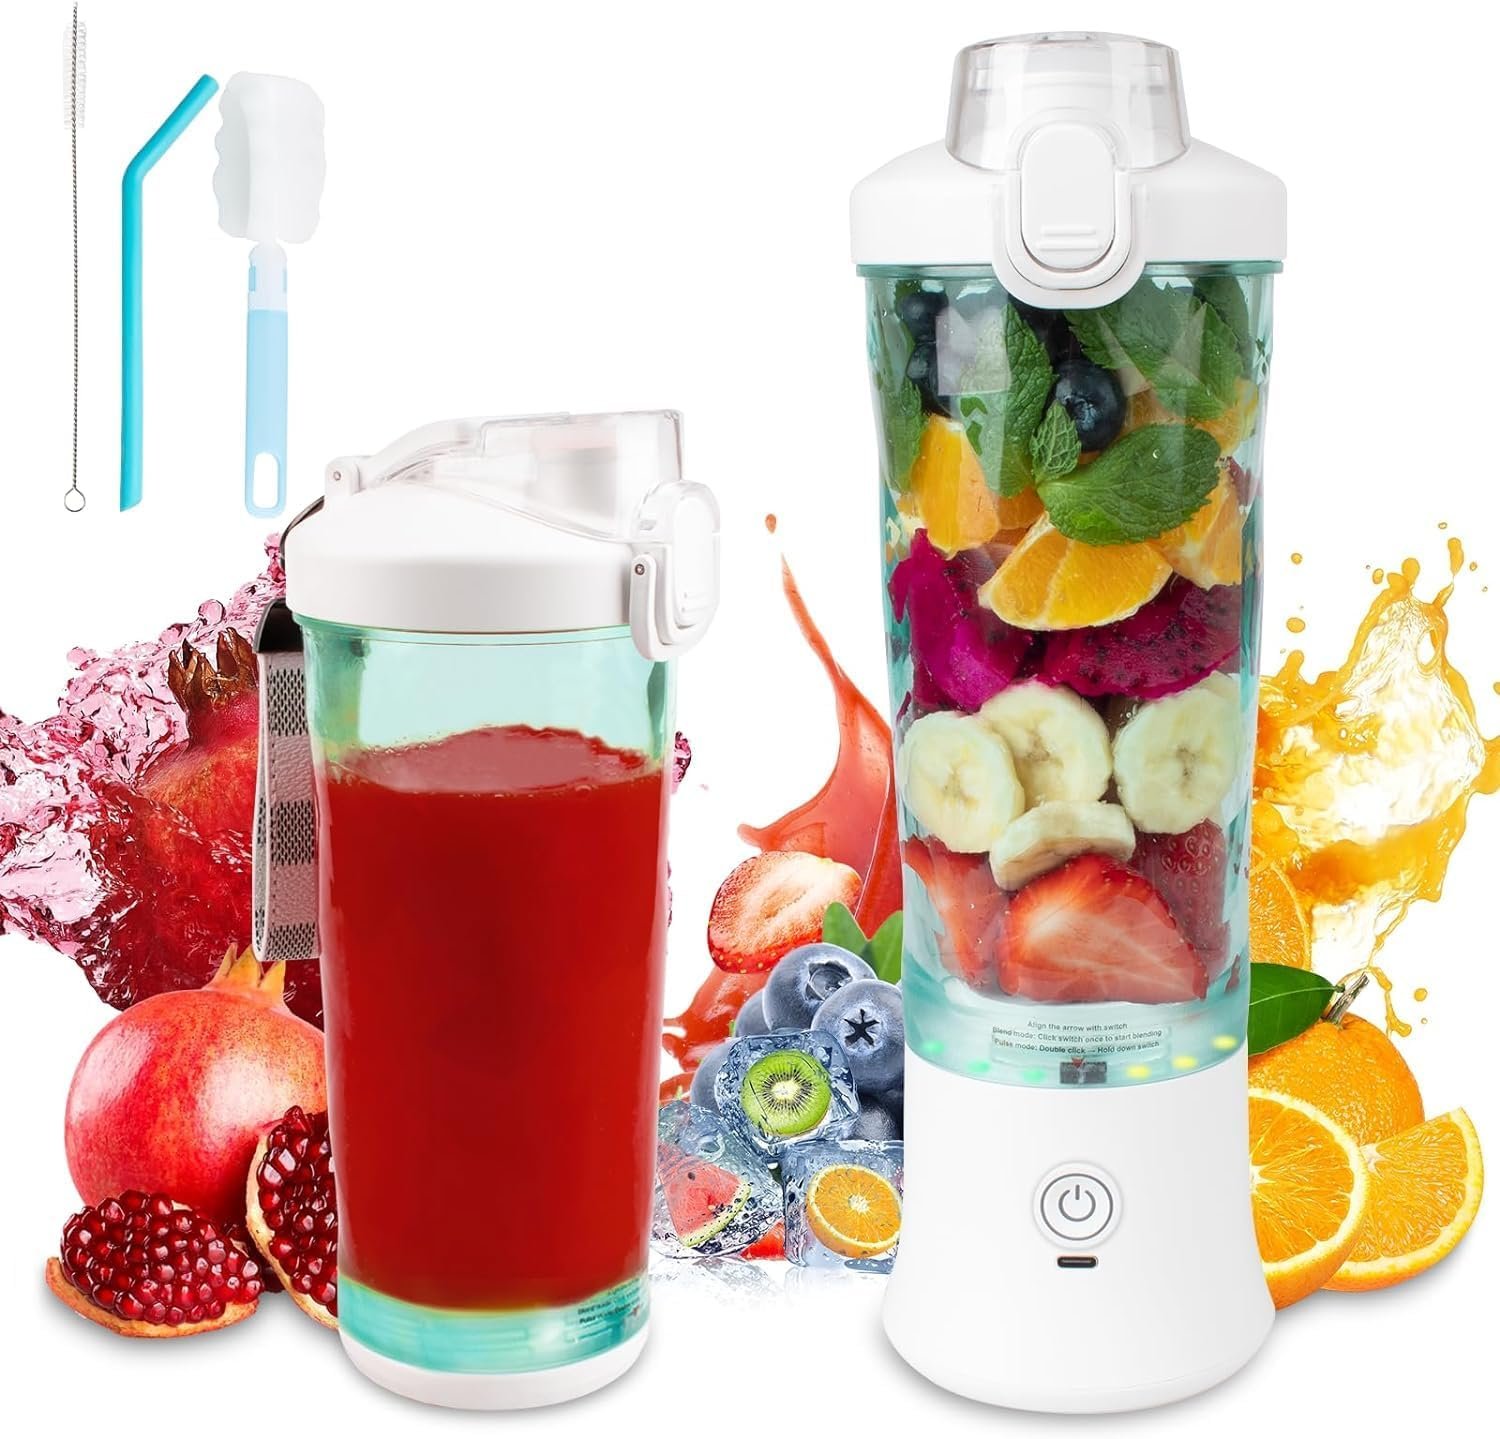 Smoothie Blender Review